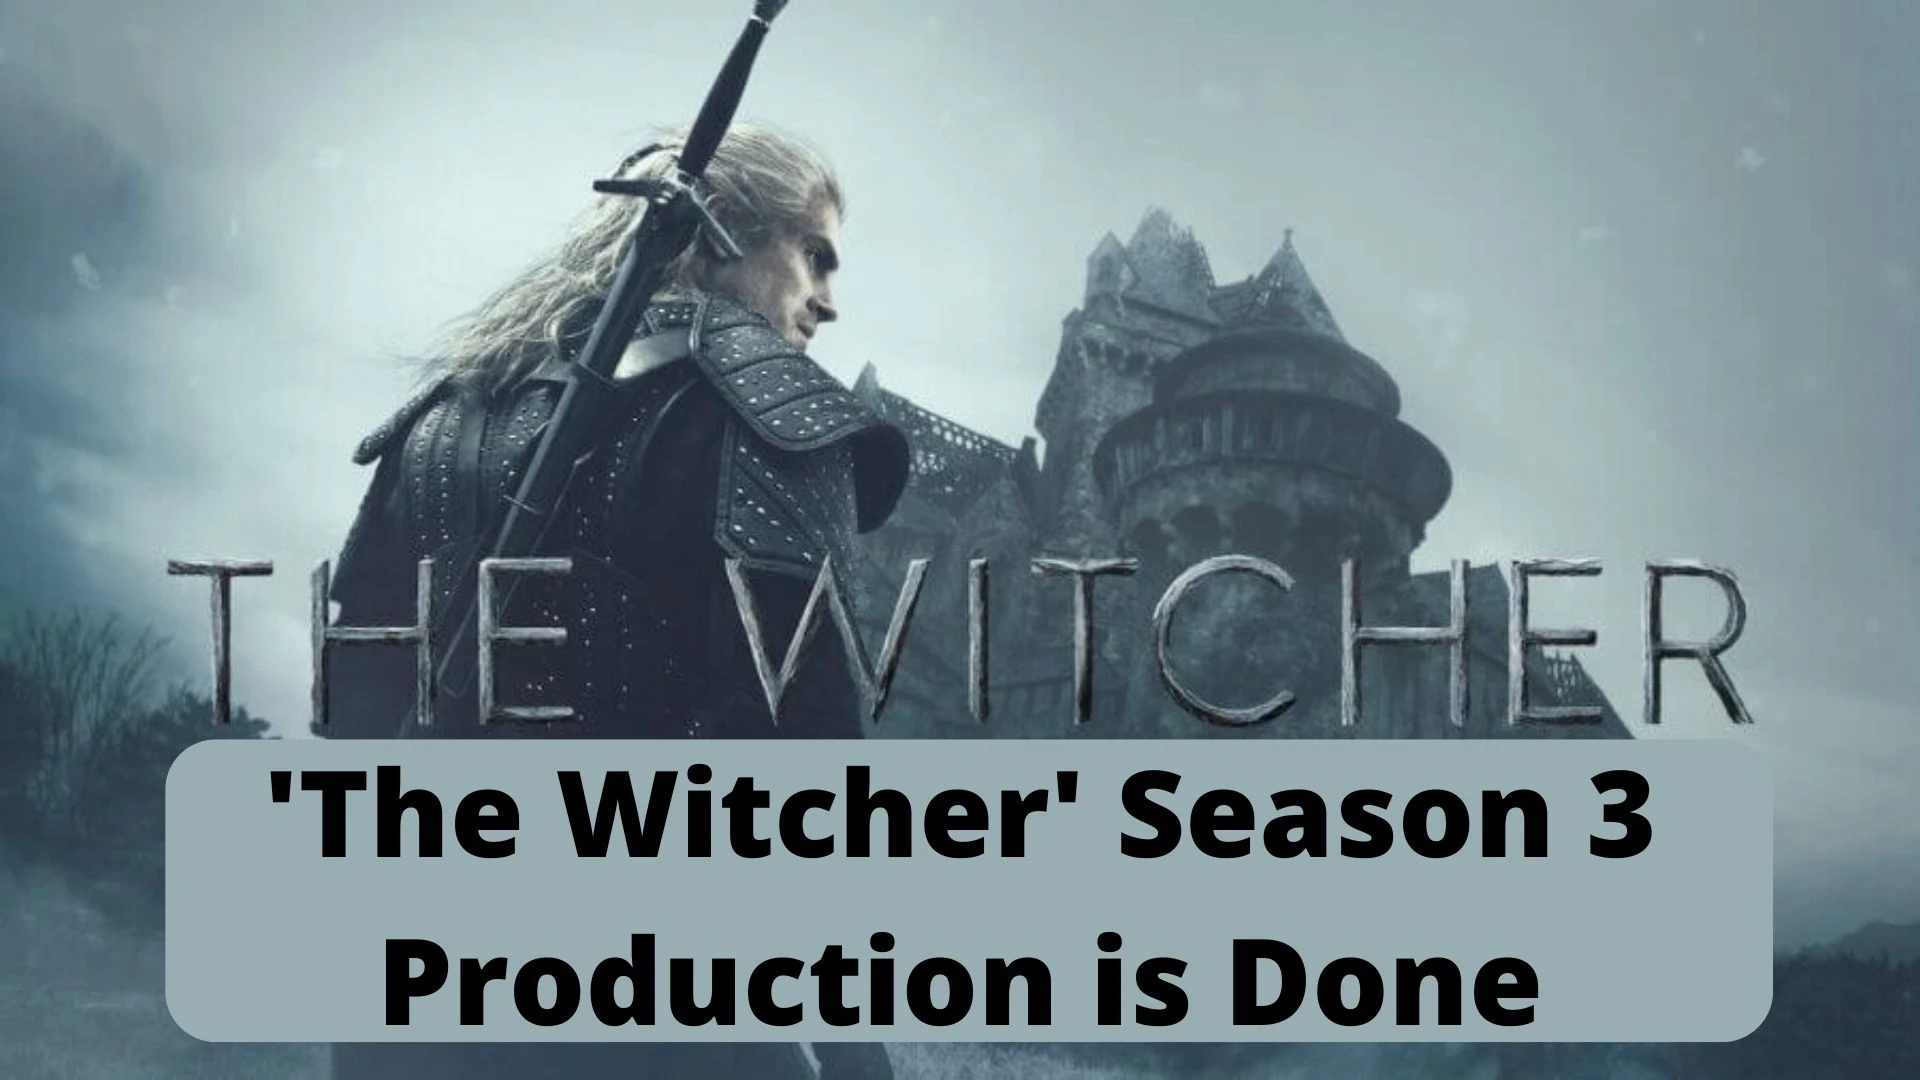 'The Witcher' Season 3 Production is Done